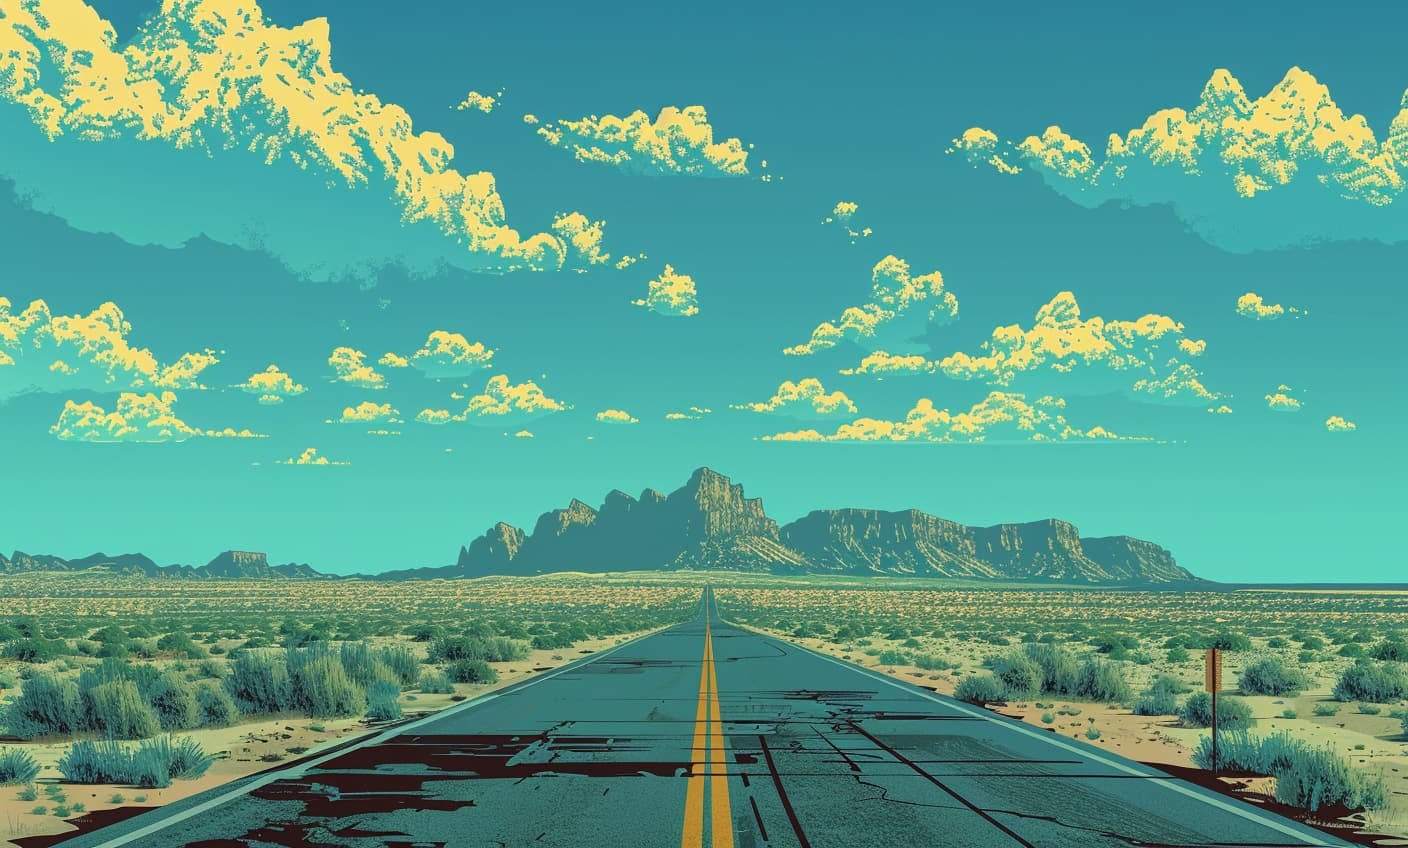 graphic novel illustration wide road leading into the distance, symbolizing endless possibilities and new adventures. Distant mountains can be seen in the background